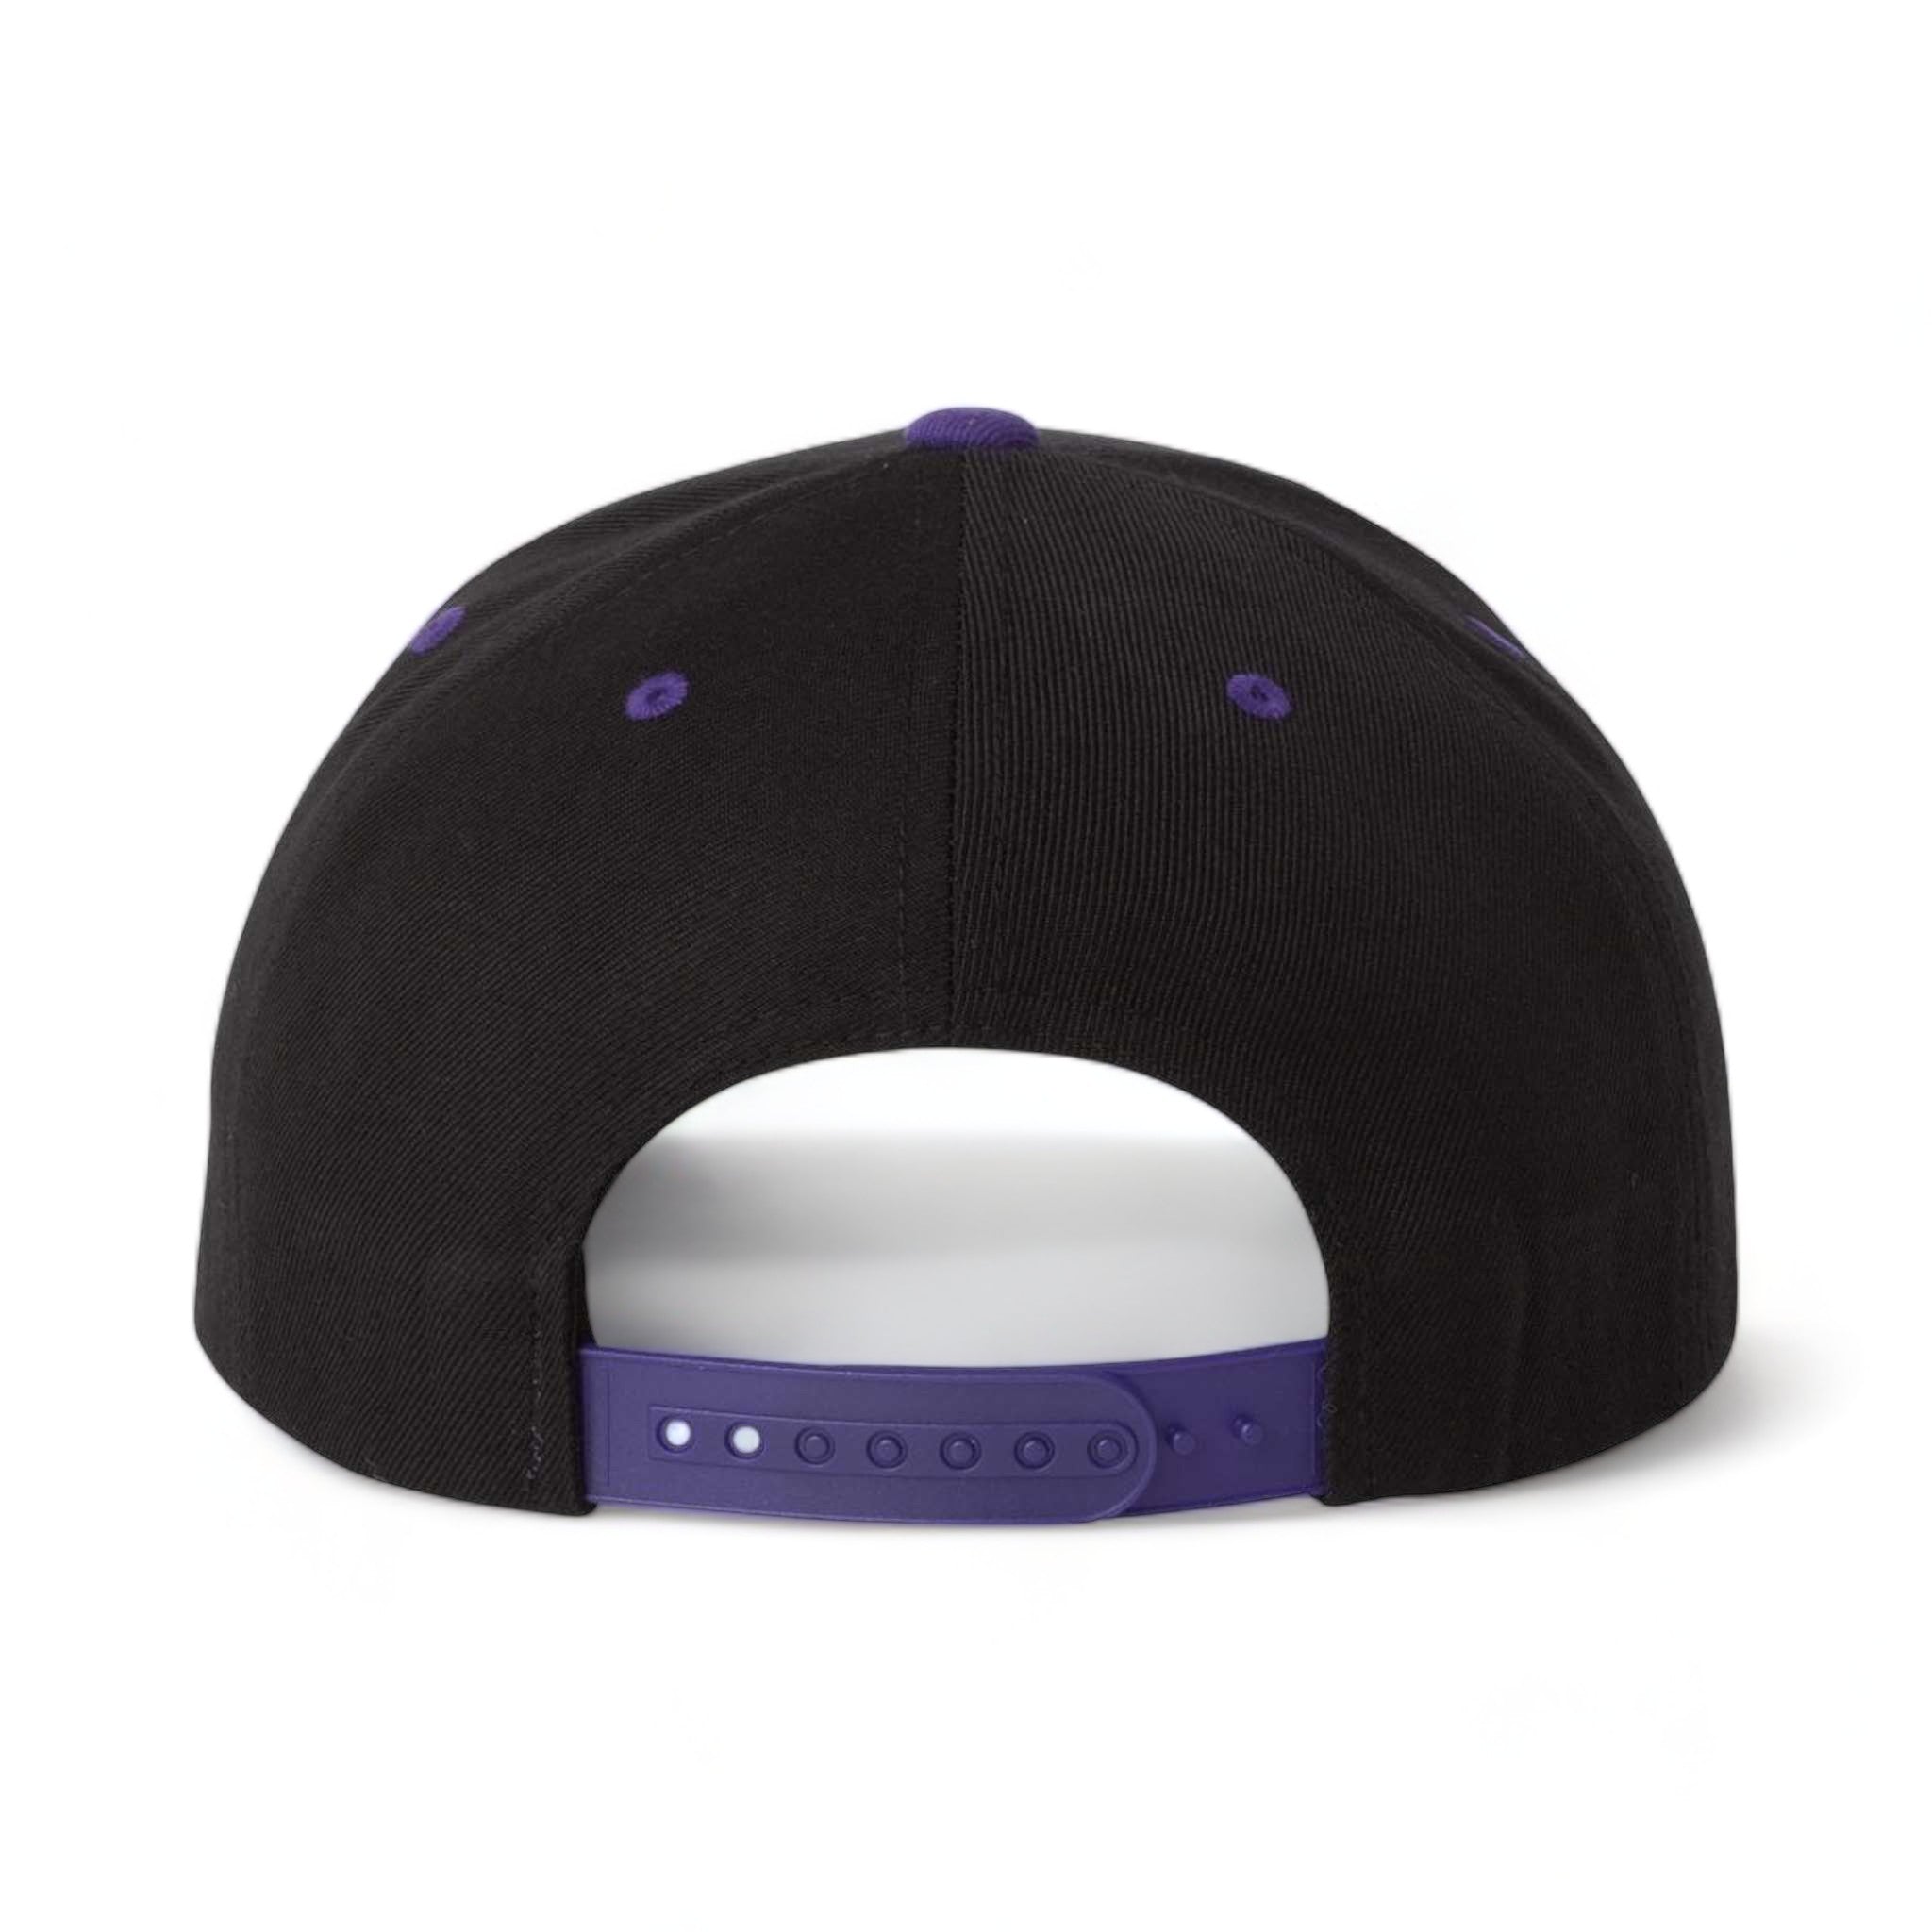 Back view of YP Classics 6089M custom hat in black and purple